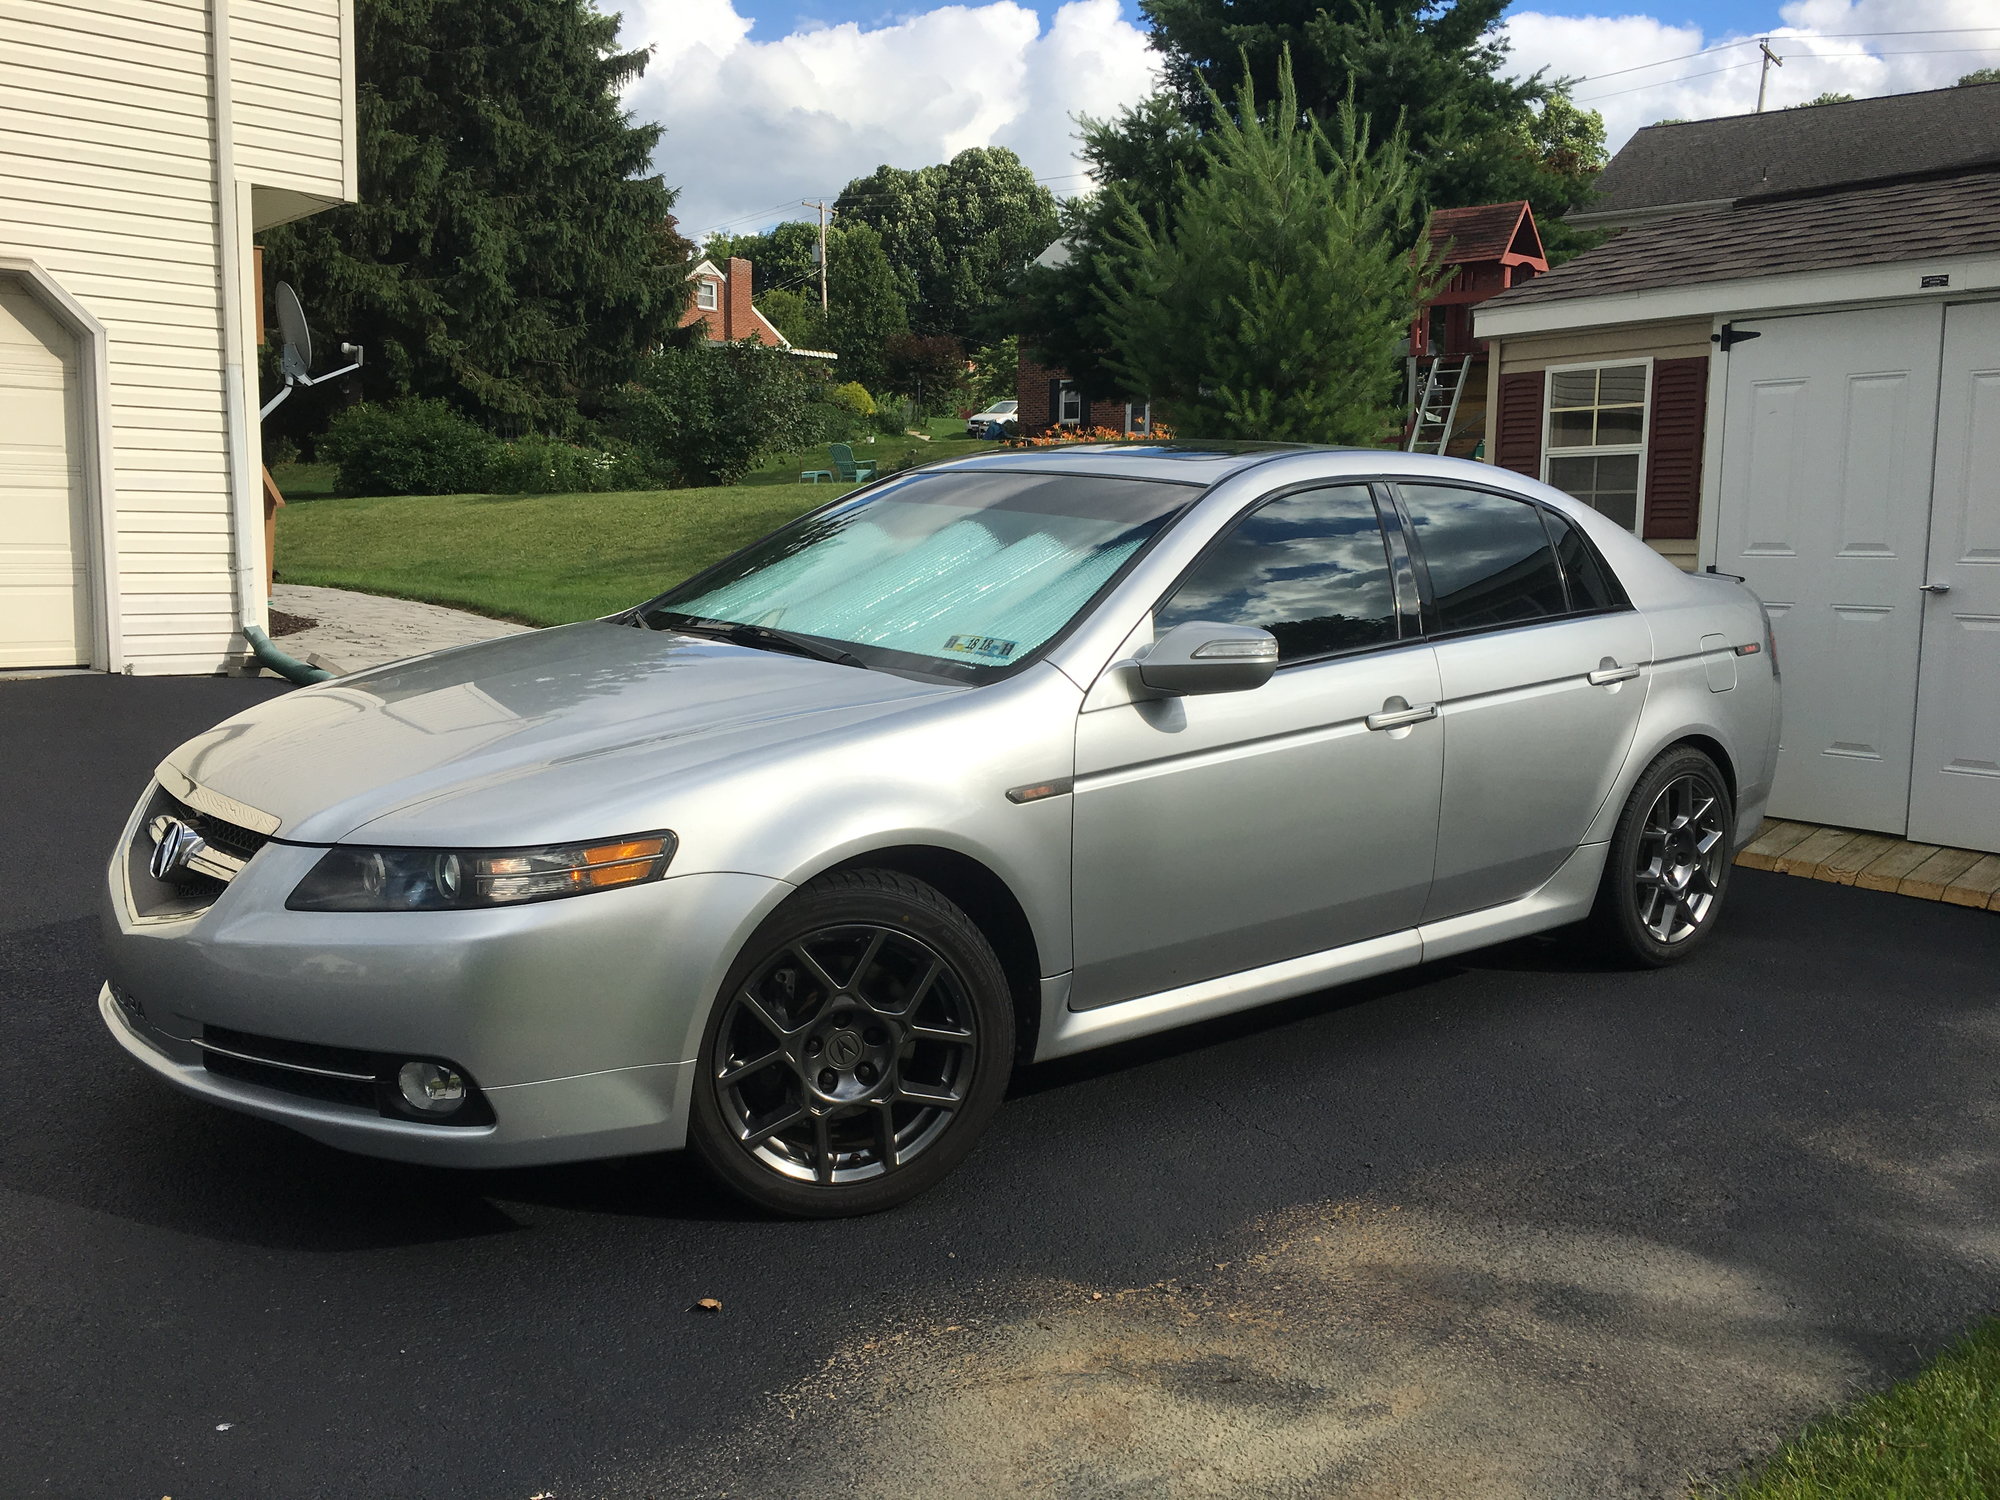 2007 Acura TL - SOLD: 07 TL Type-S with rare 6-Speed Manual - Used - VIN 19uua75577a032008 - 135,275 Miles - 6 cyl - 2WD - Manual - Sedan - Silver - Loganville, PA 17360, United States